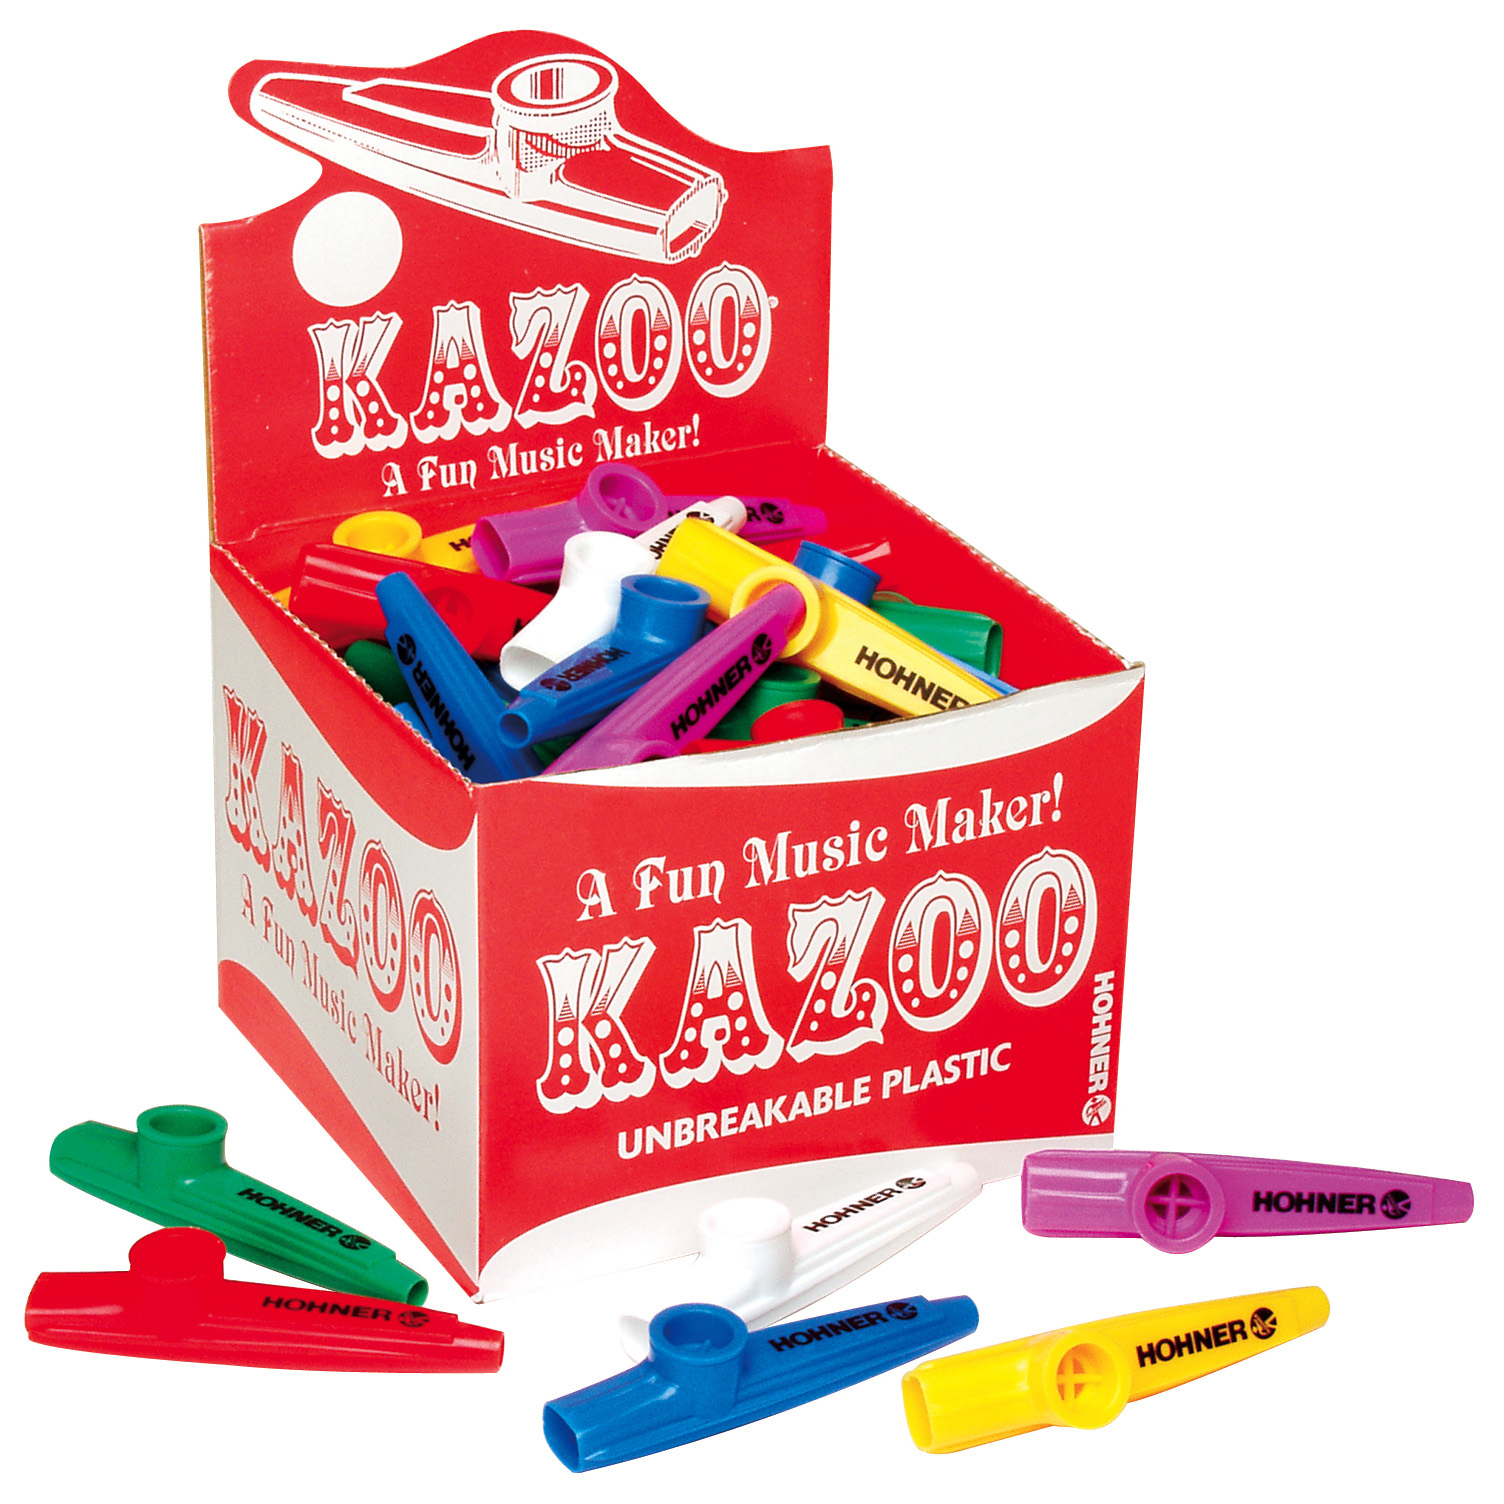 HOHNER Kids Kazoo Classpack, Assorted Colors, Pack of 50